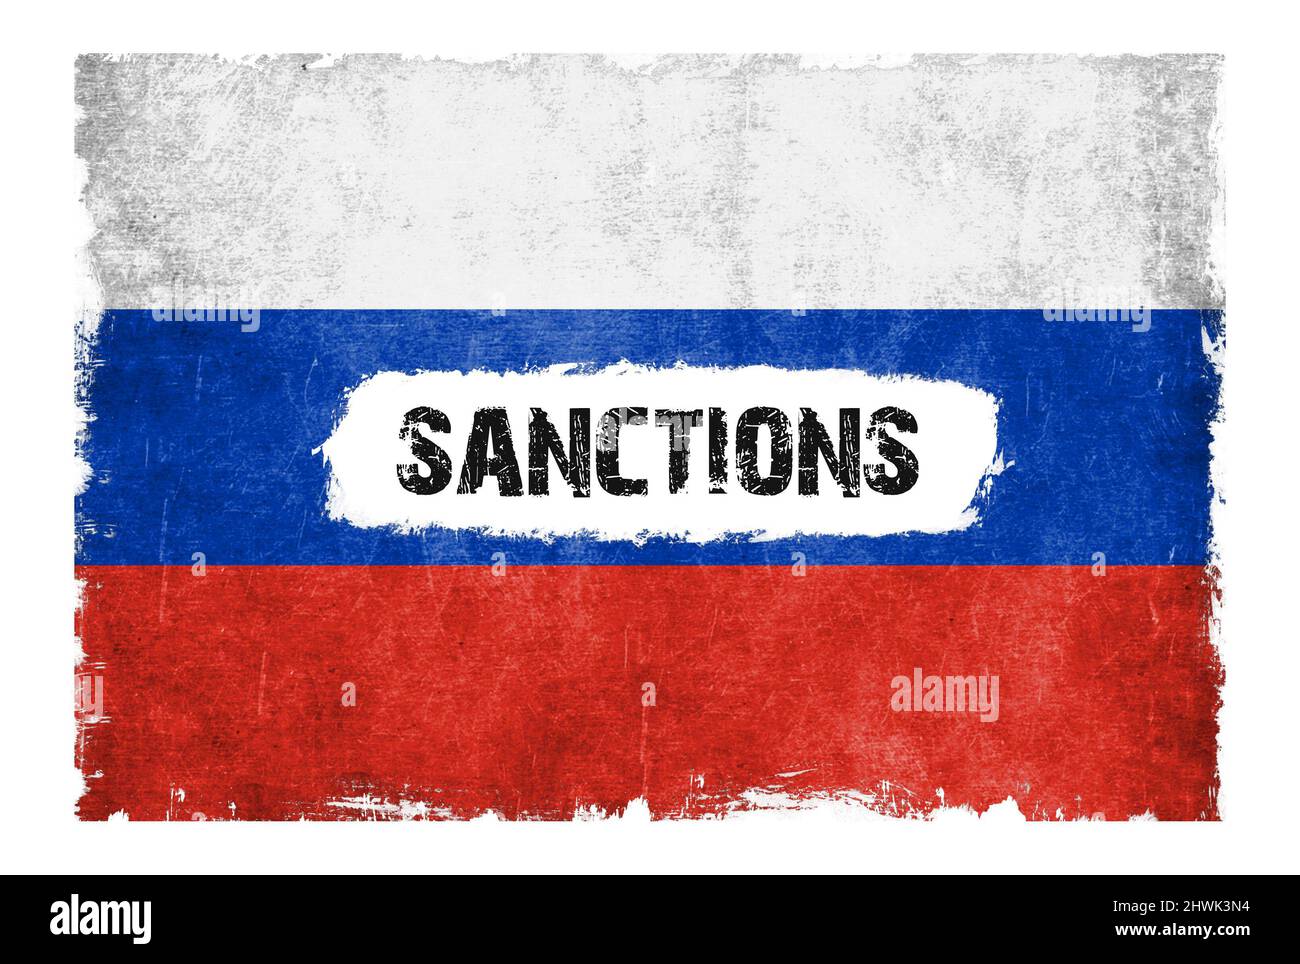 Sanctions against Russia Stock Photo